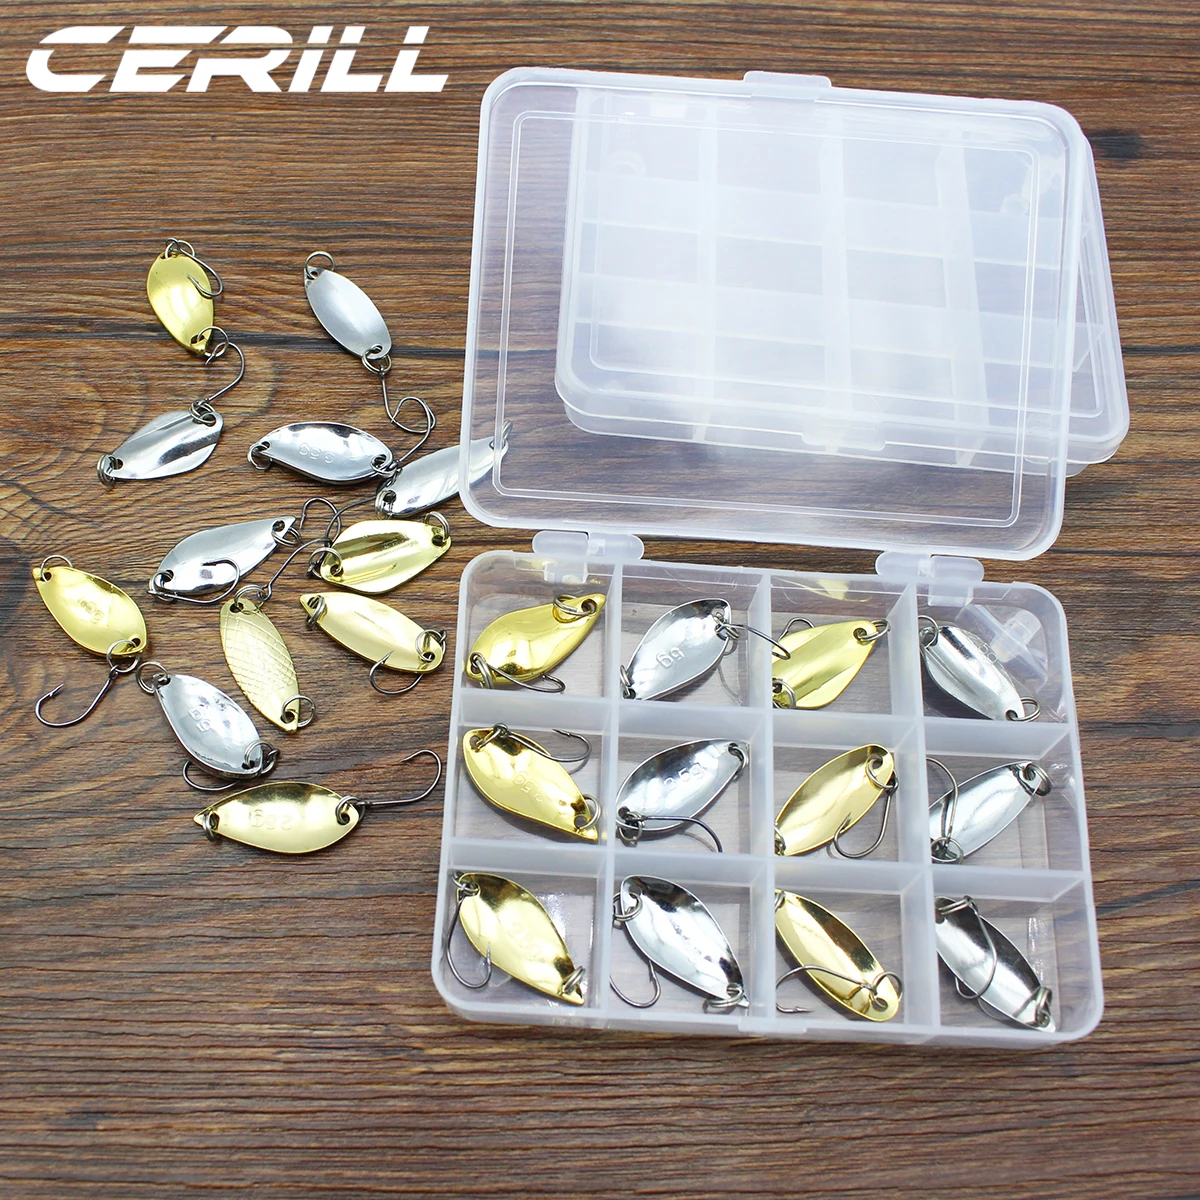 Фото Cerill 12 PCS Spoon Metal Fishing Lure Set Wobbler Spinner Bait With Hook Spinnerbait Kit Box Gold Silver Color | Спорт и